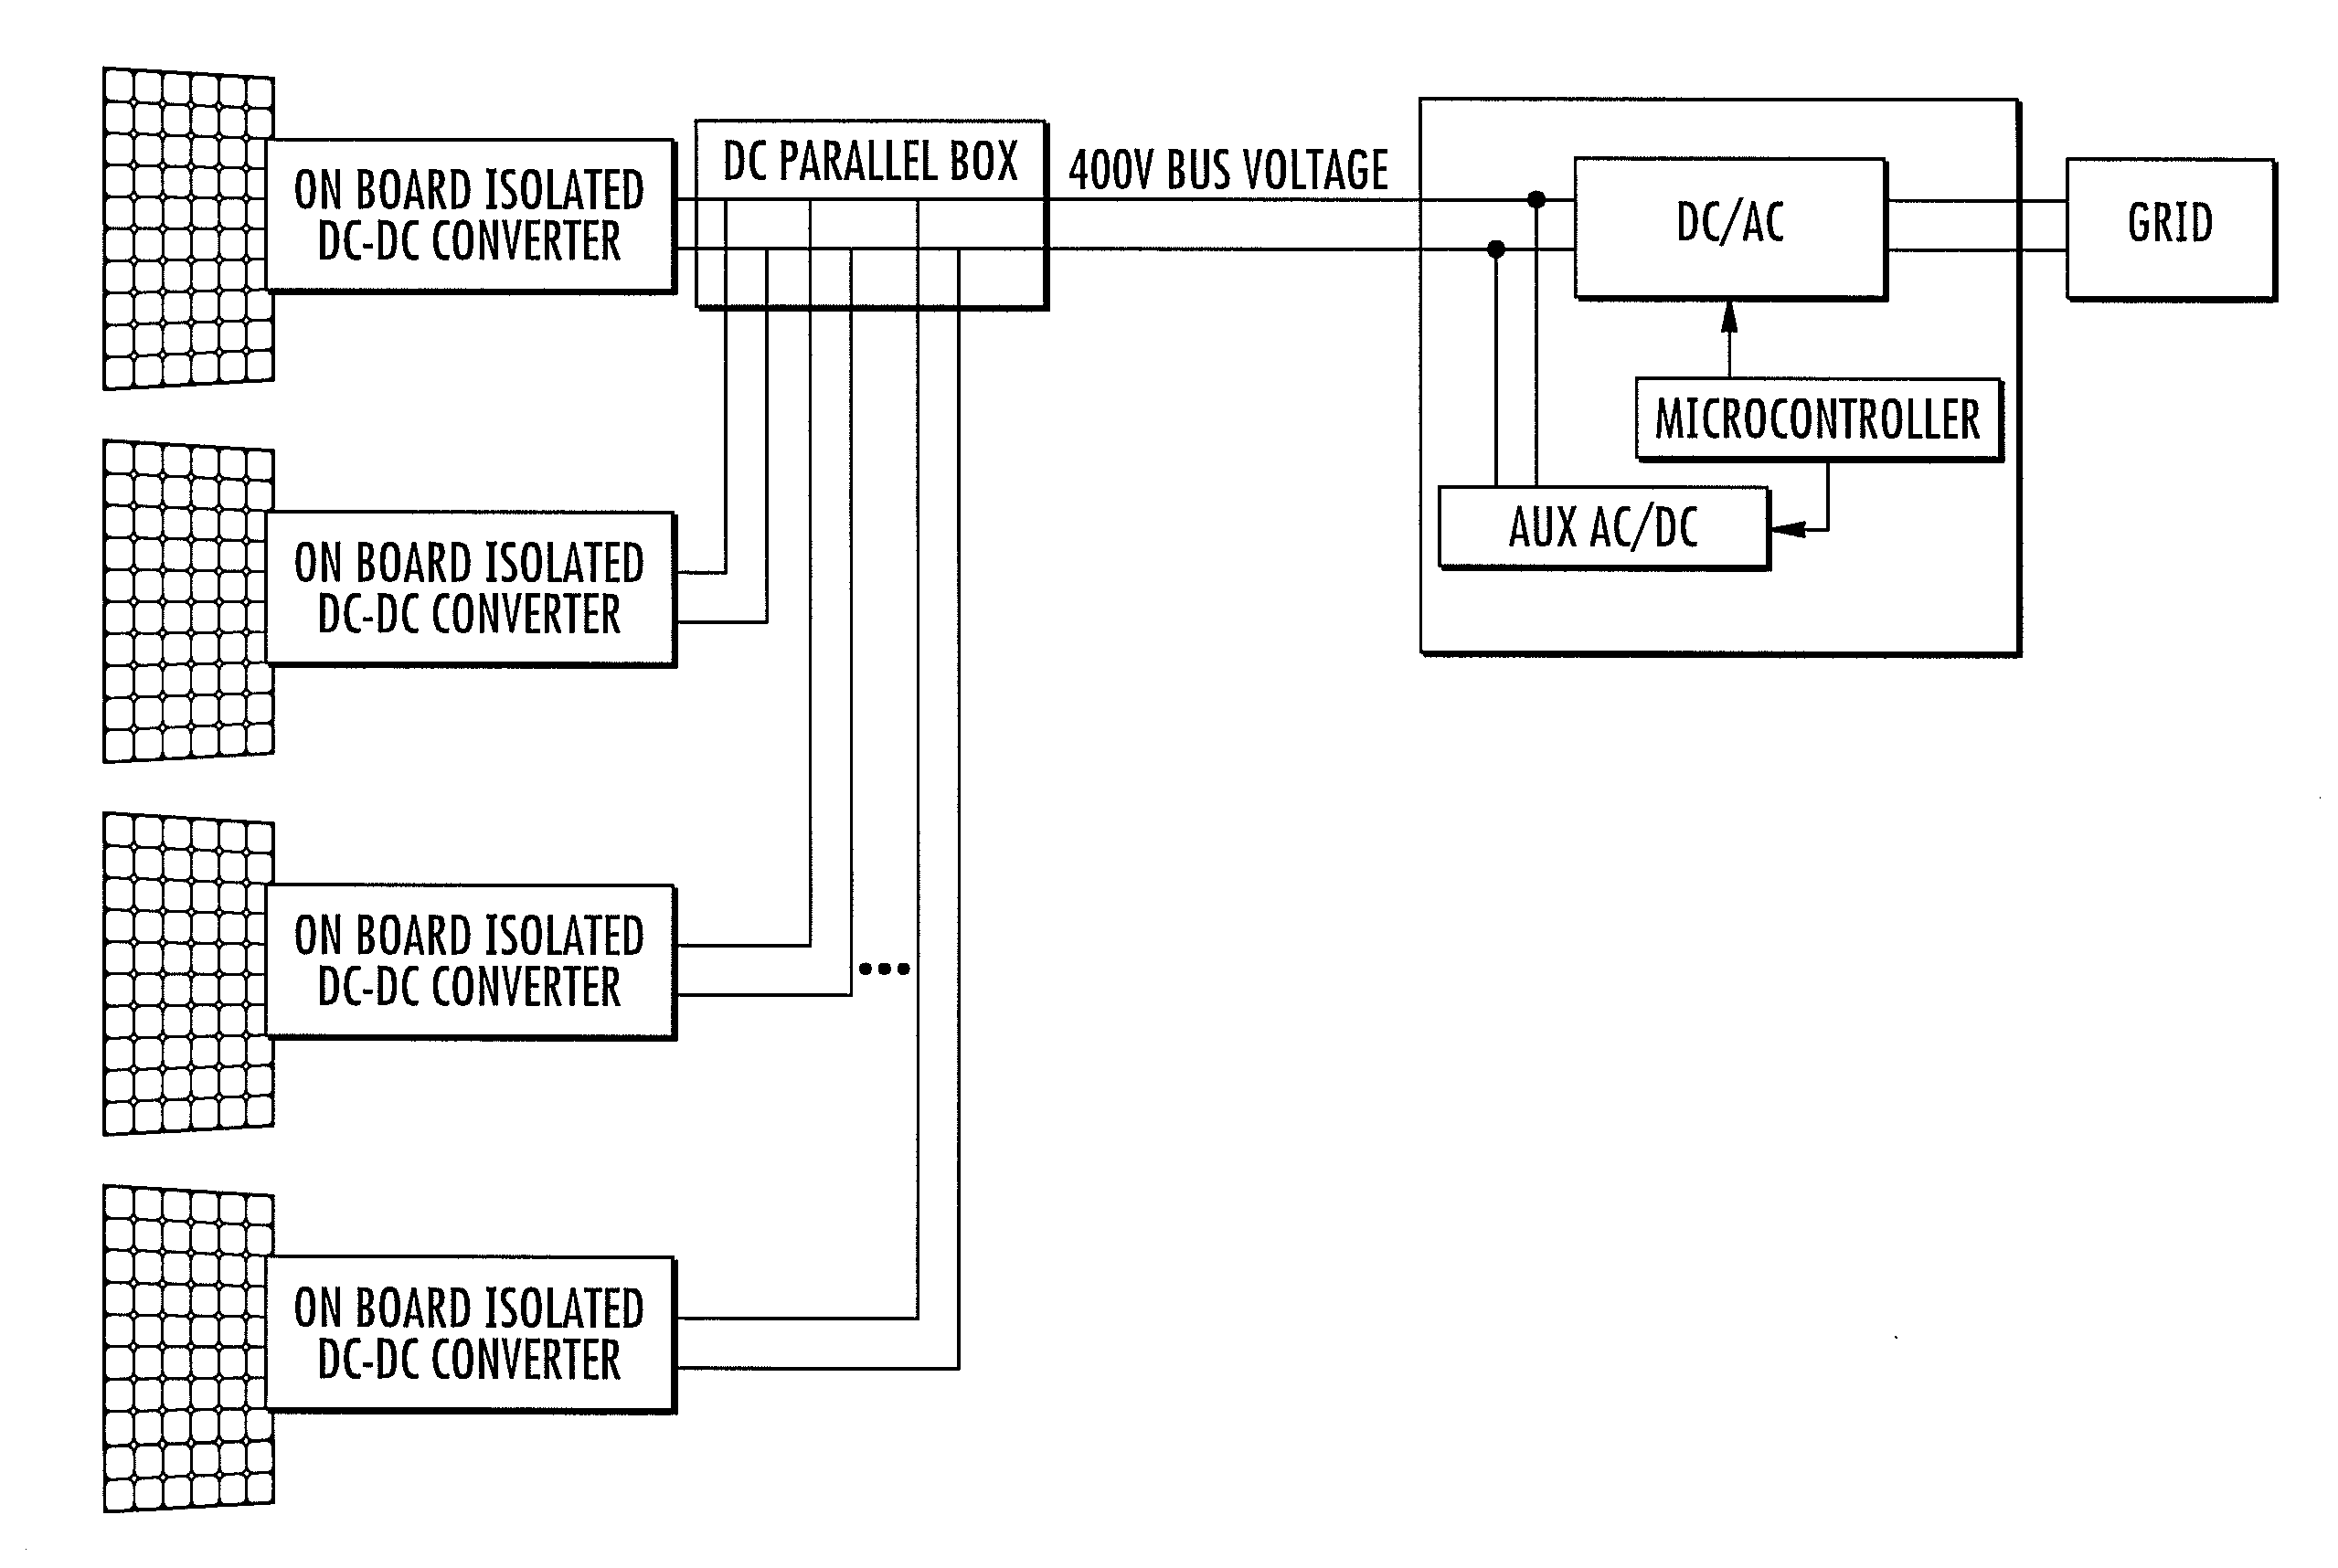 Automatic system for synchronous enablement-disablement of solar photovoltaic panels of an energy production plant with distributed dc/dc conversion